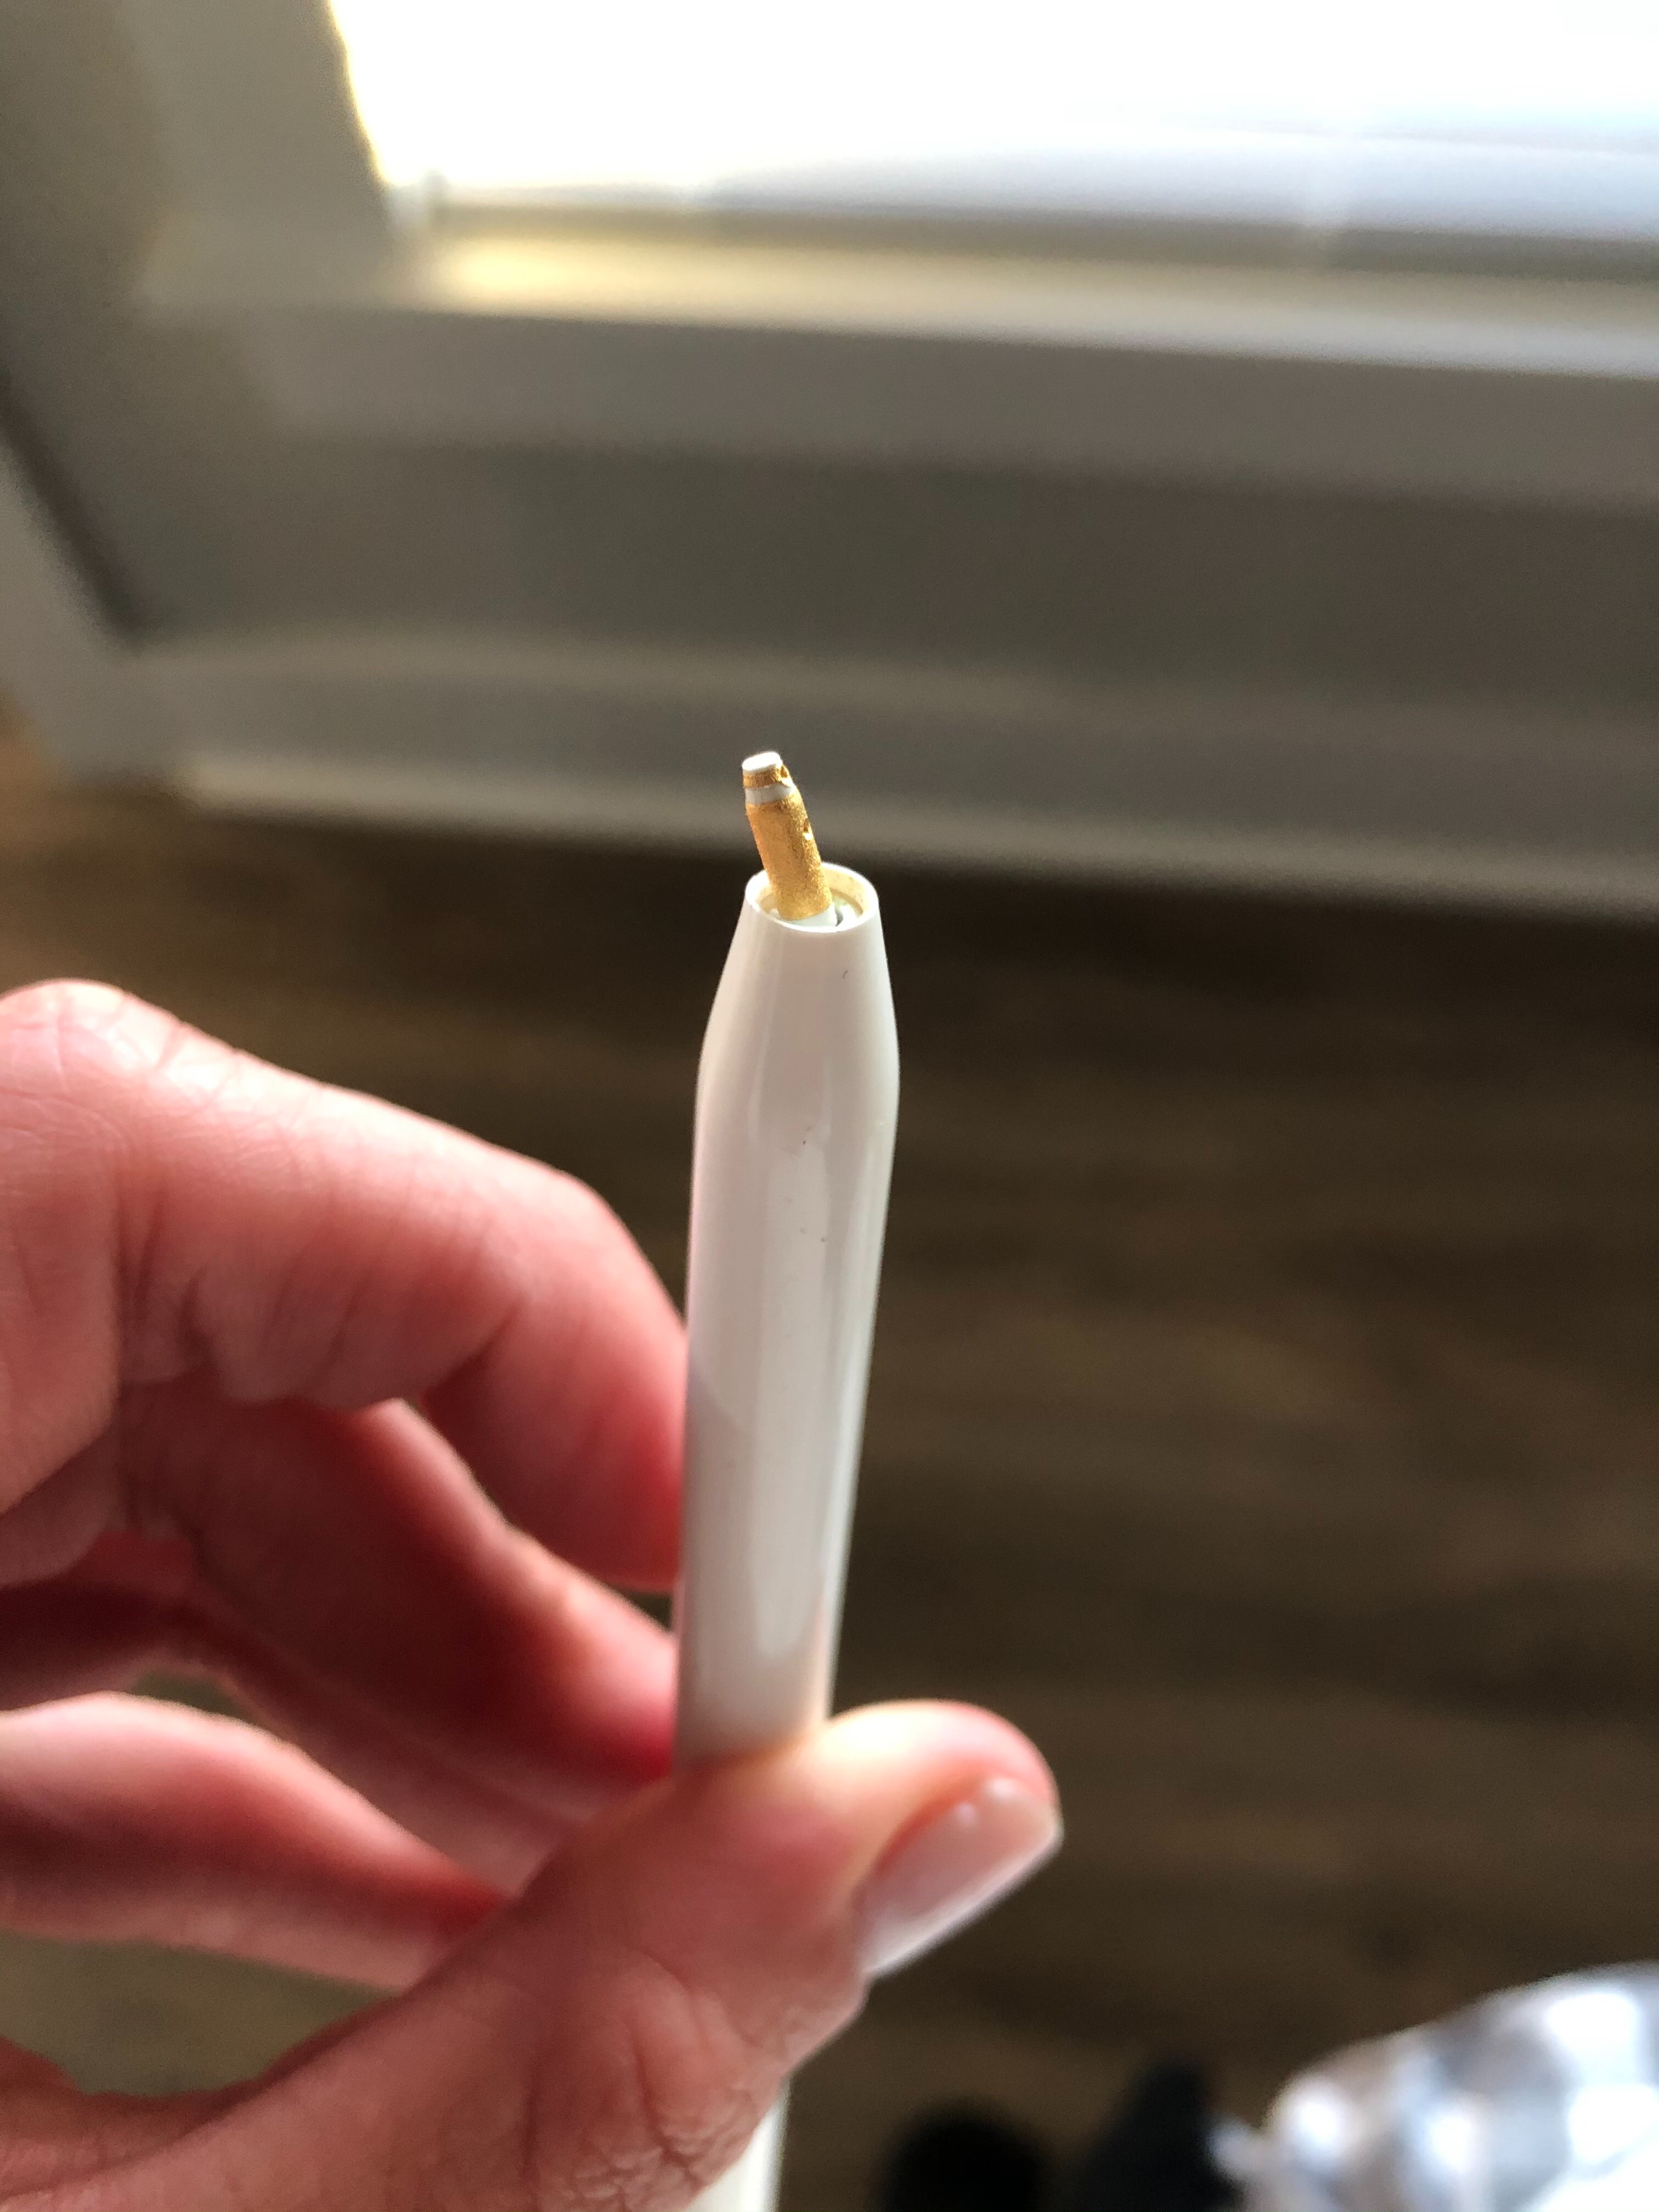 How do I know if my Apple Pencil is broken?